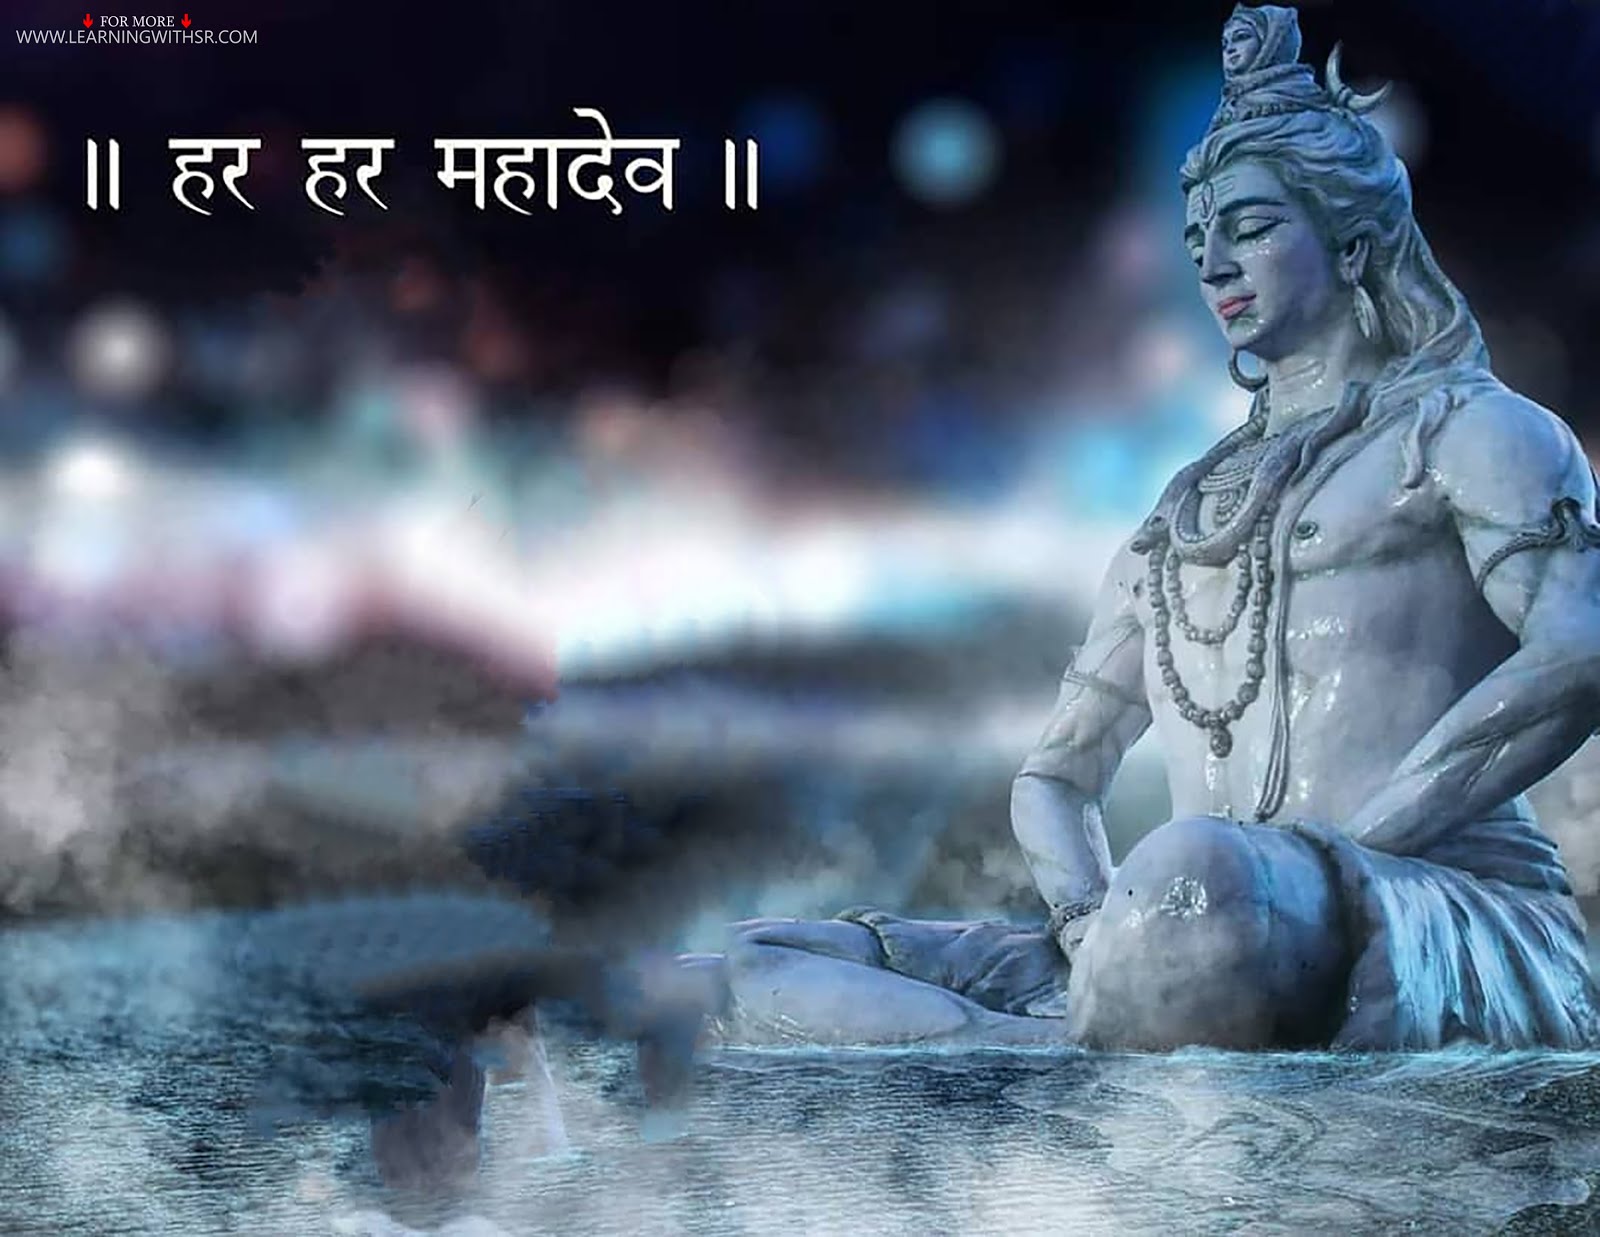 Mahakal background download for photo editing, Mahadev cb background  download 2019 - LEARNINGWITHSR